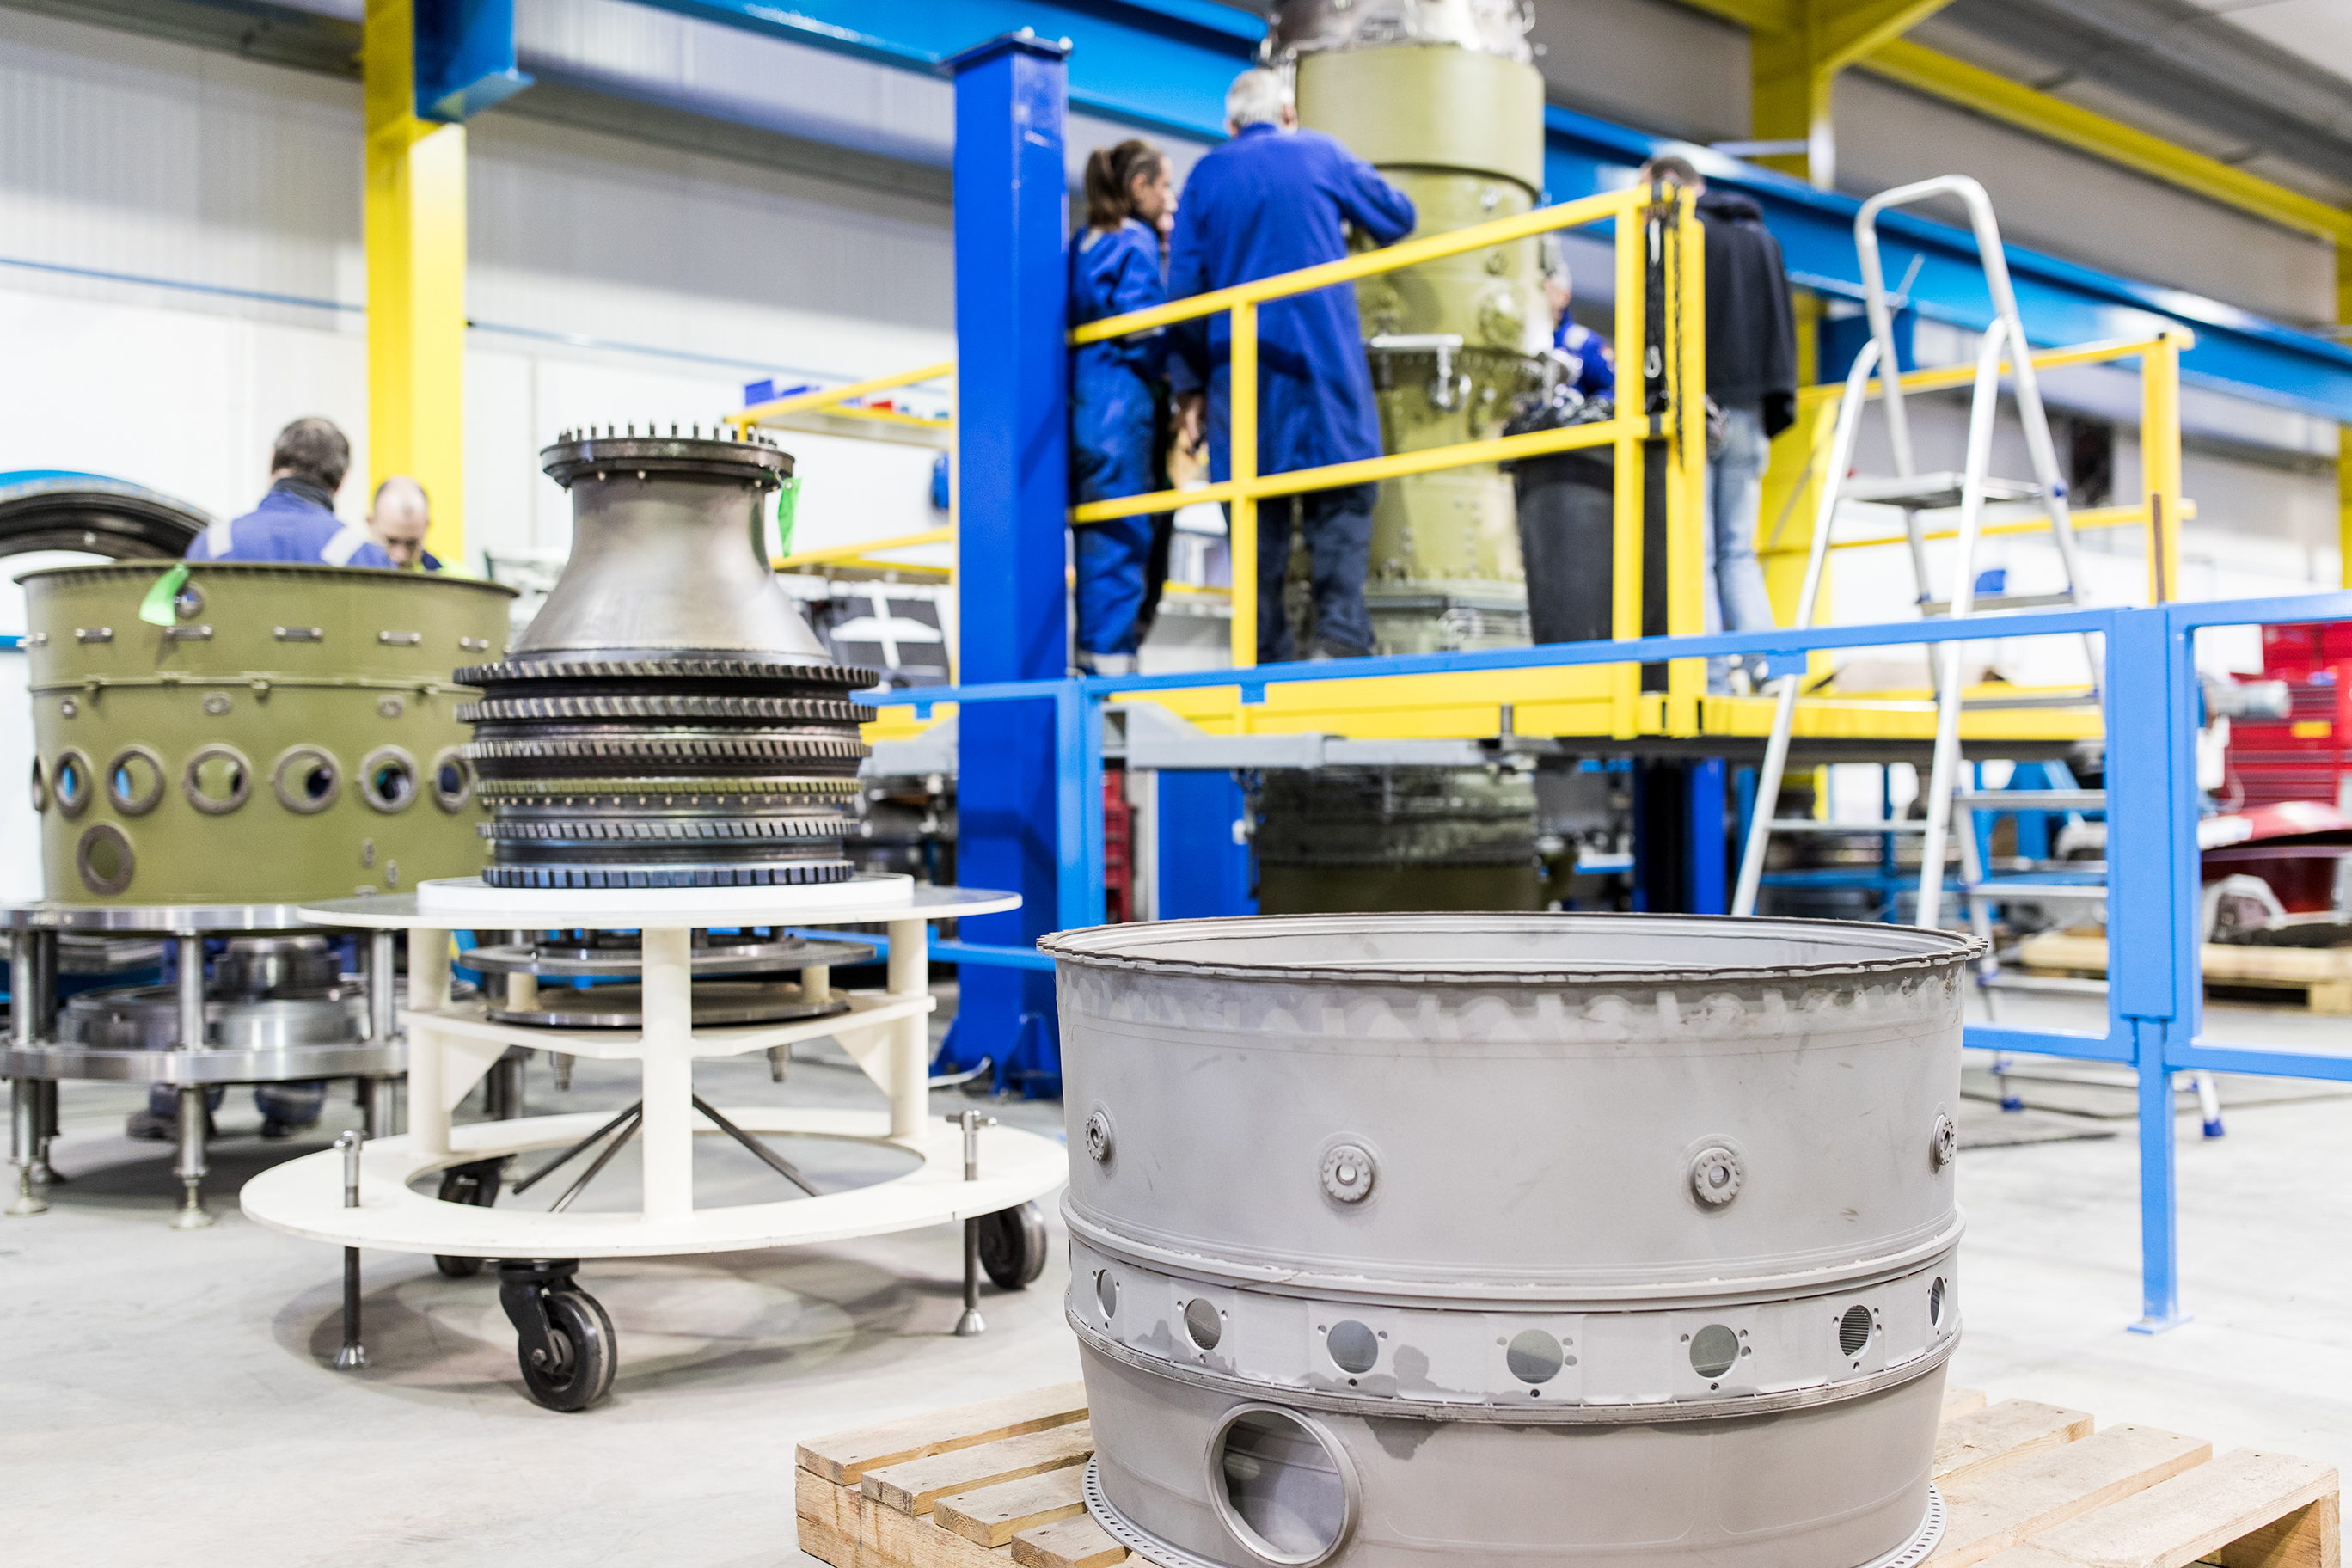 Aero-derivative turbines offer compact power solutions